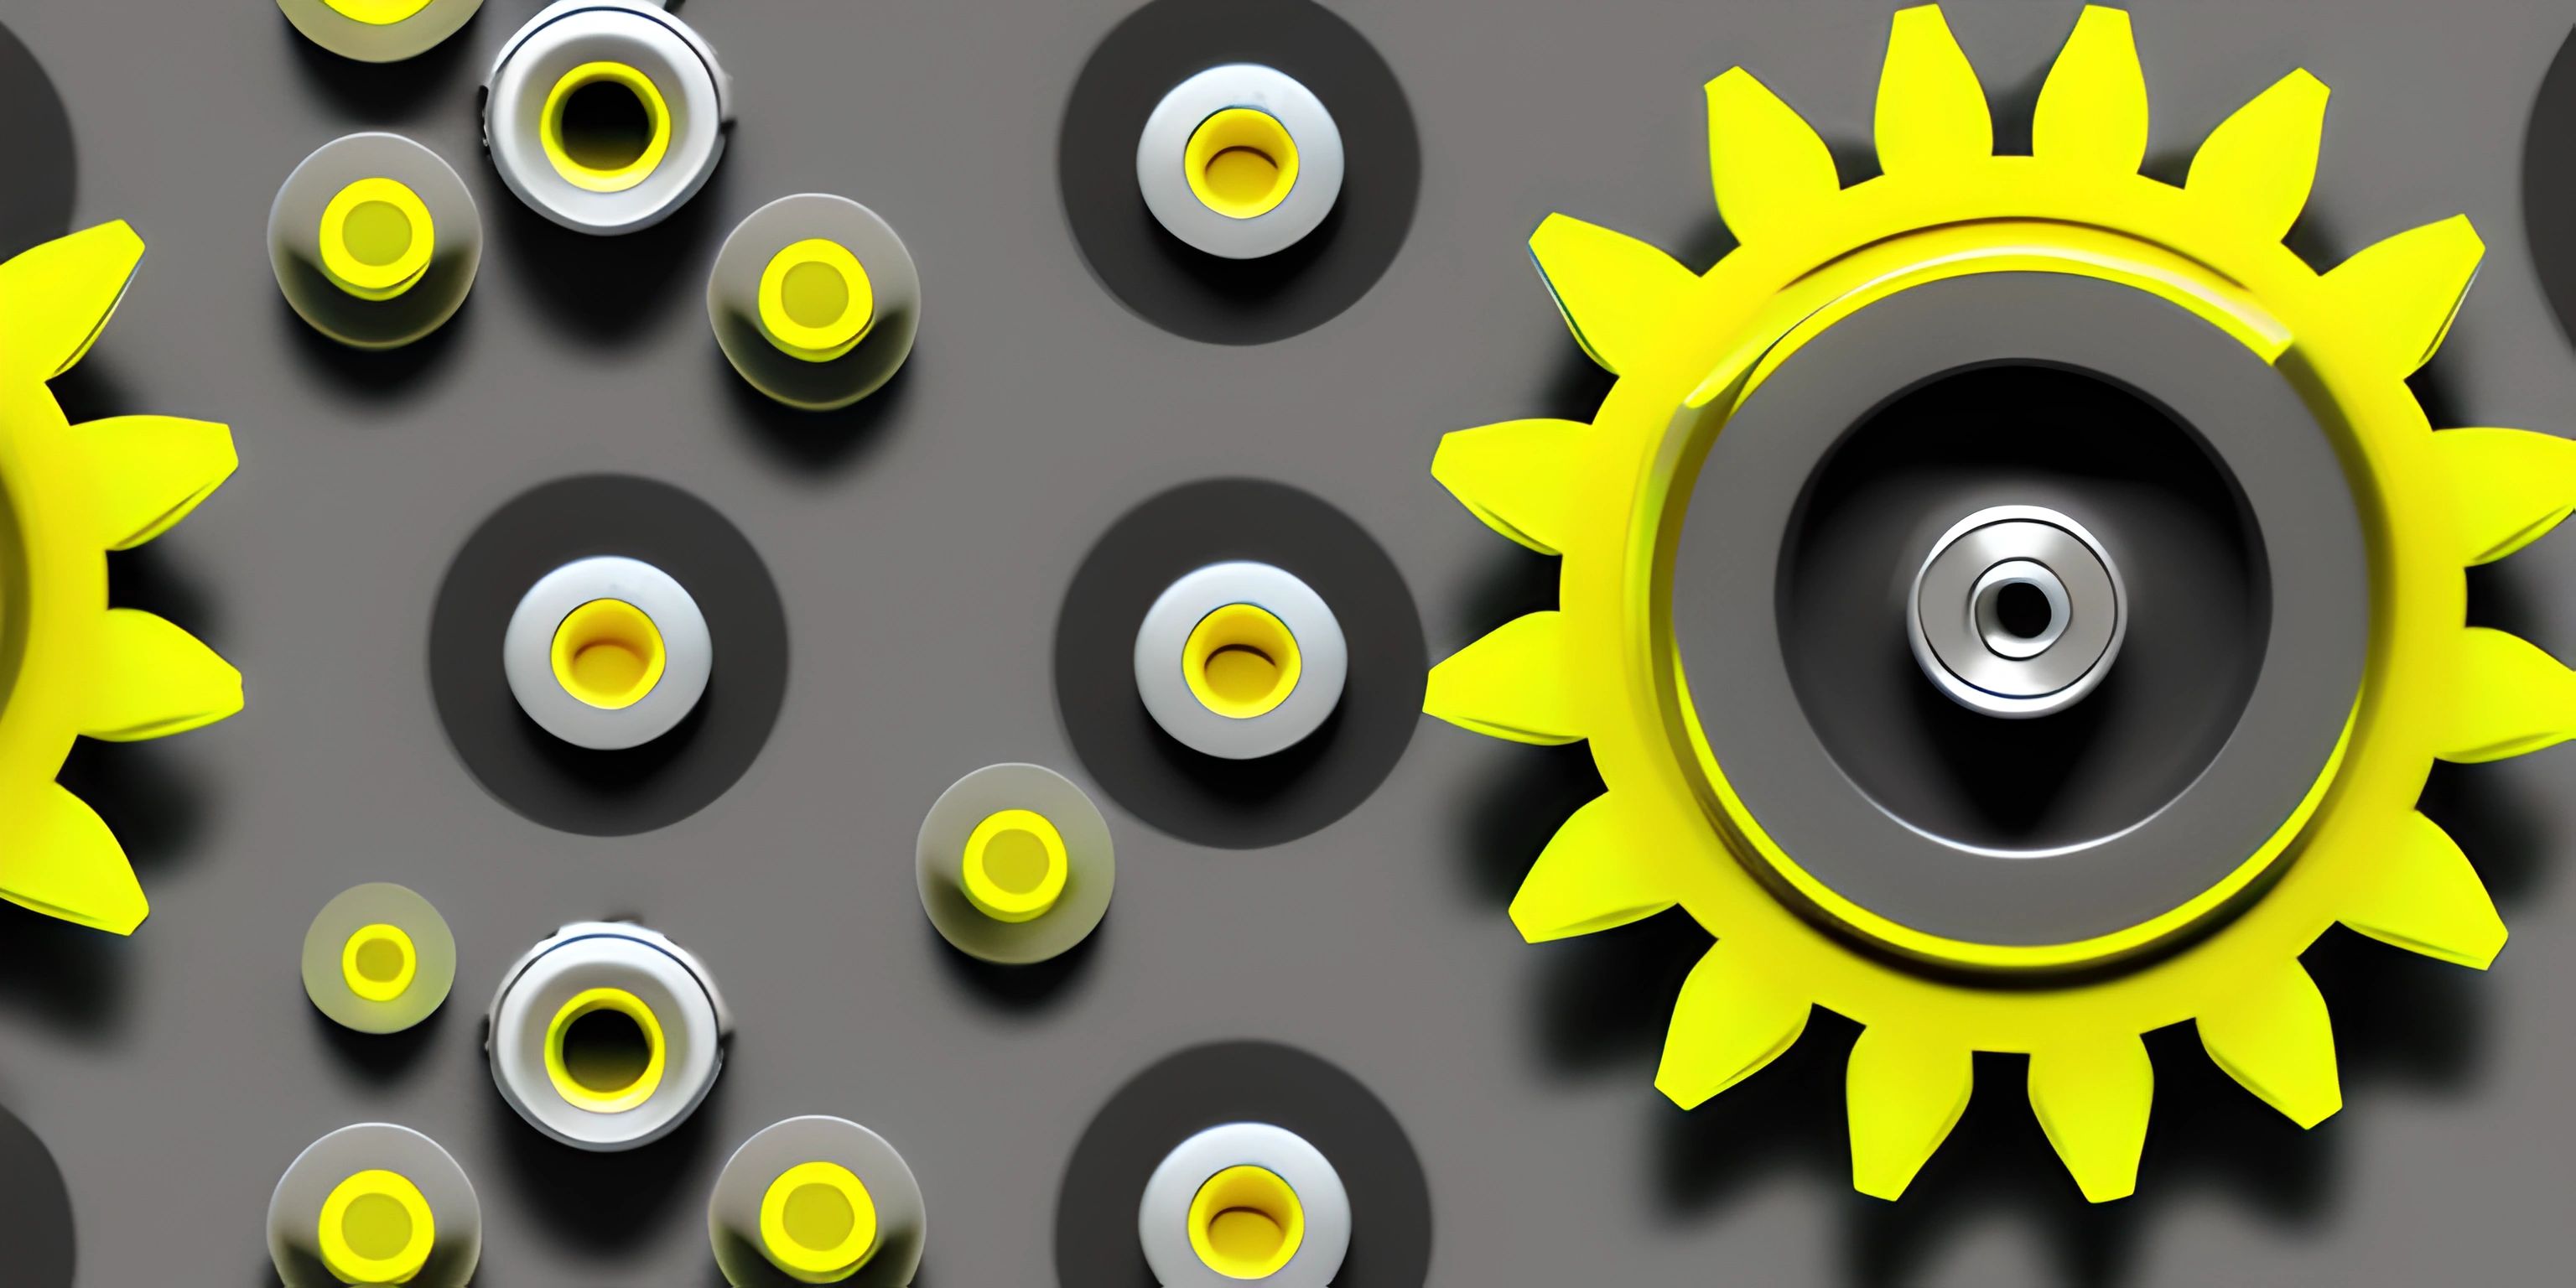 sunflowers surrounded by dots and shapes in grey background and yellow circular gears on top